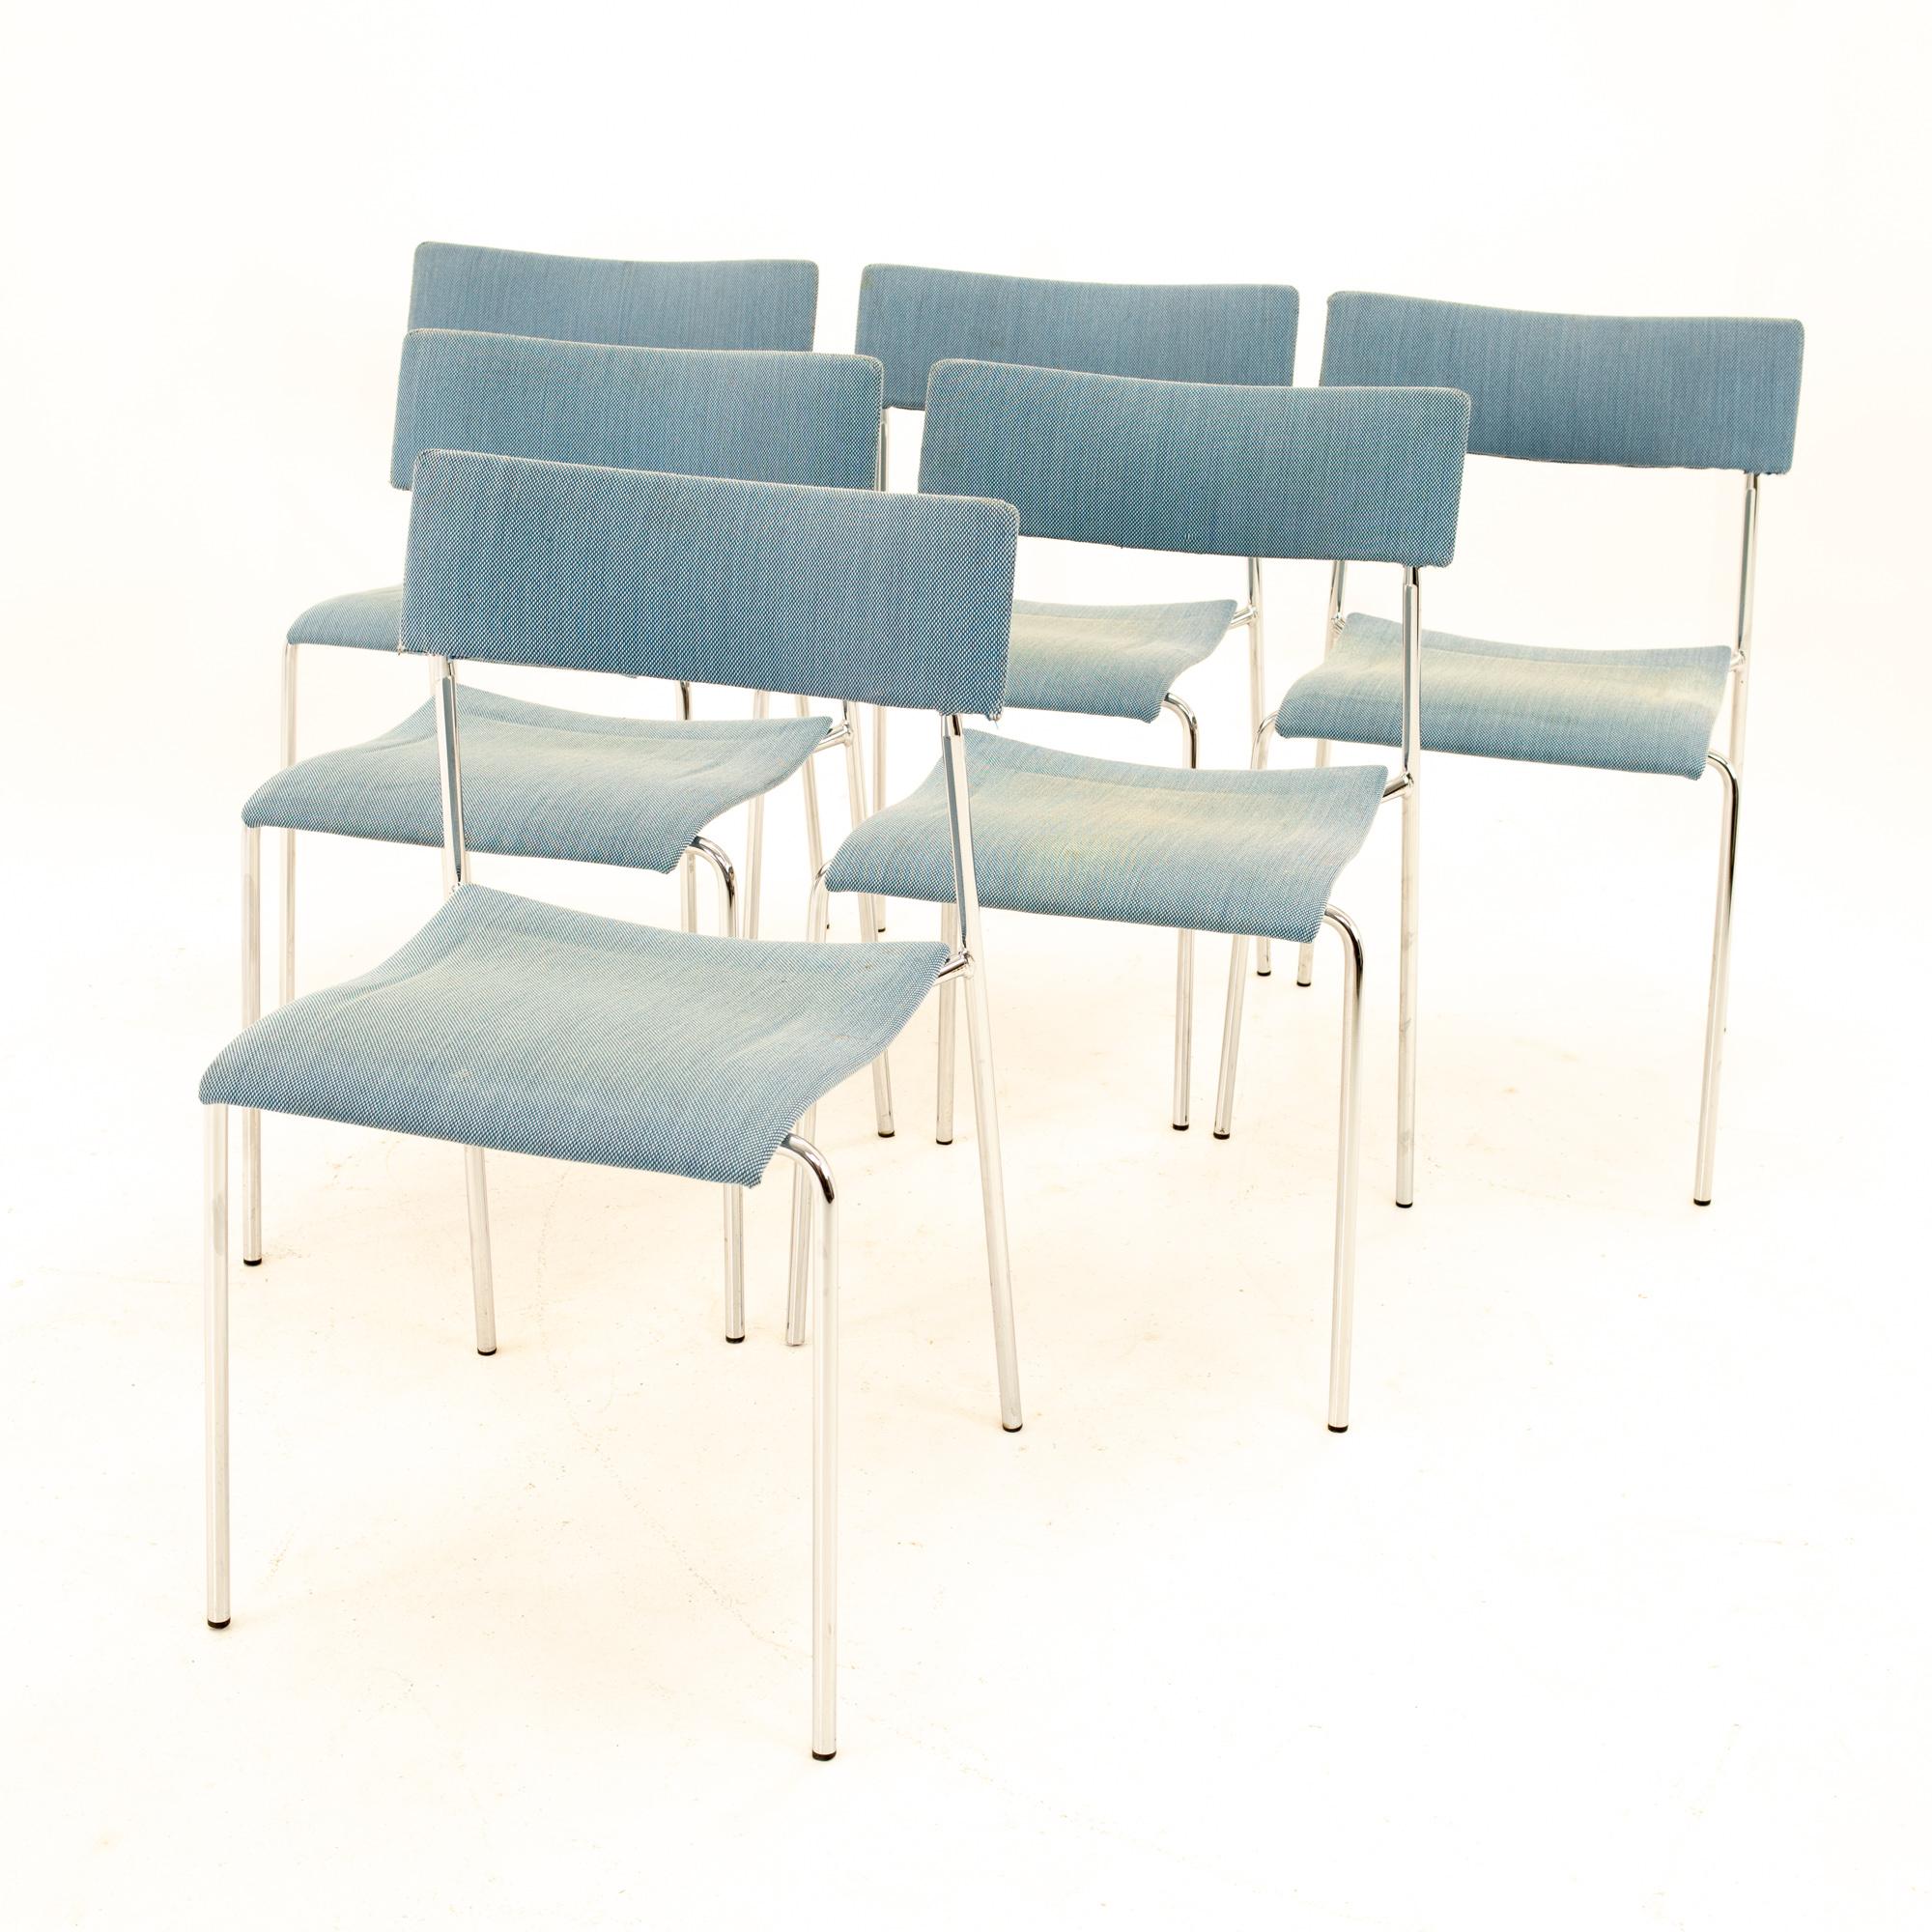 Johannes Foersom for Lammhults midcentury campus stackable dining chairs, set of 6
Each chair measures: 17.75 wide x 18.5 deep x 30 high, with a seat height of 18 inches

All pieces of furniture can be had in what we call restored vintage